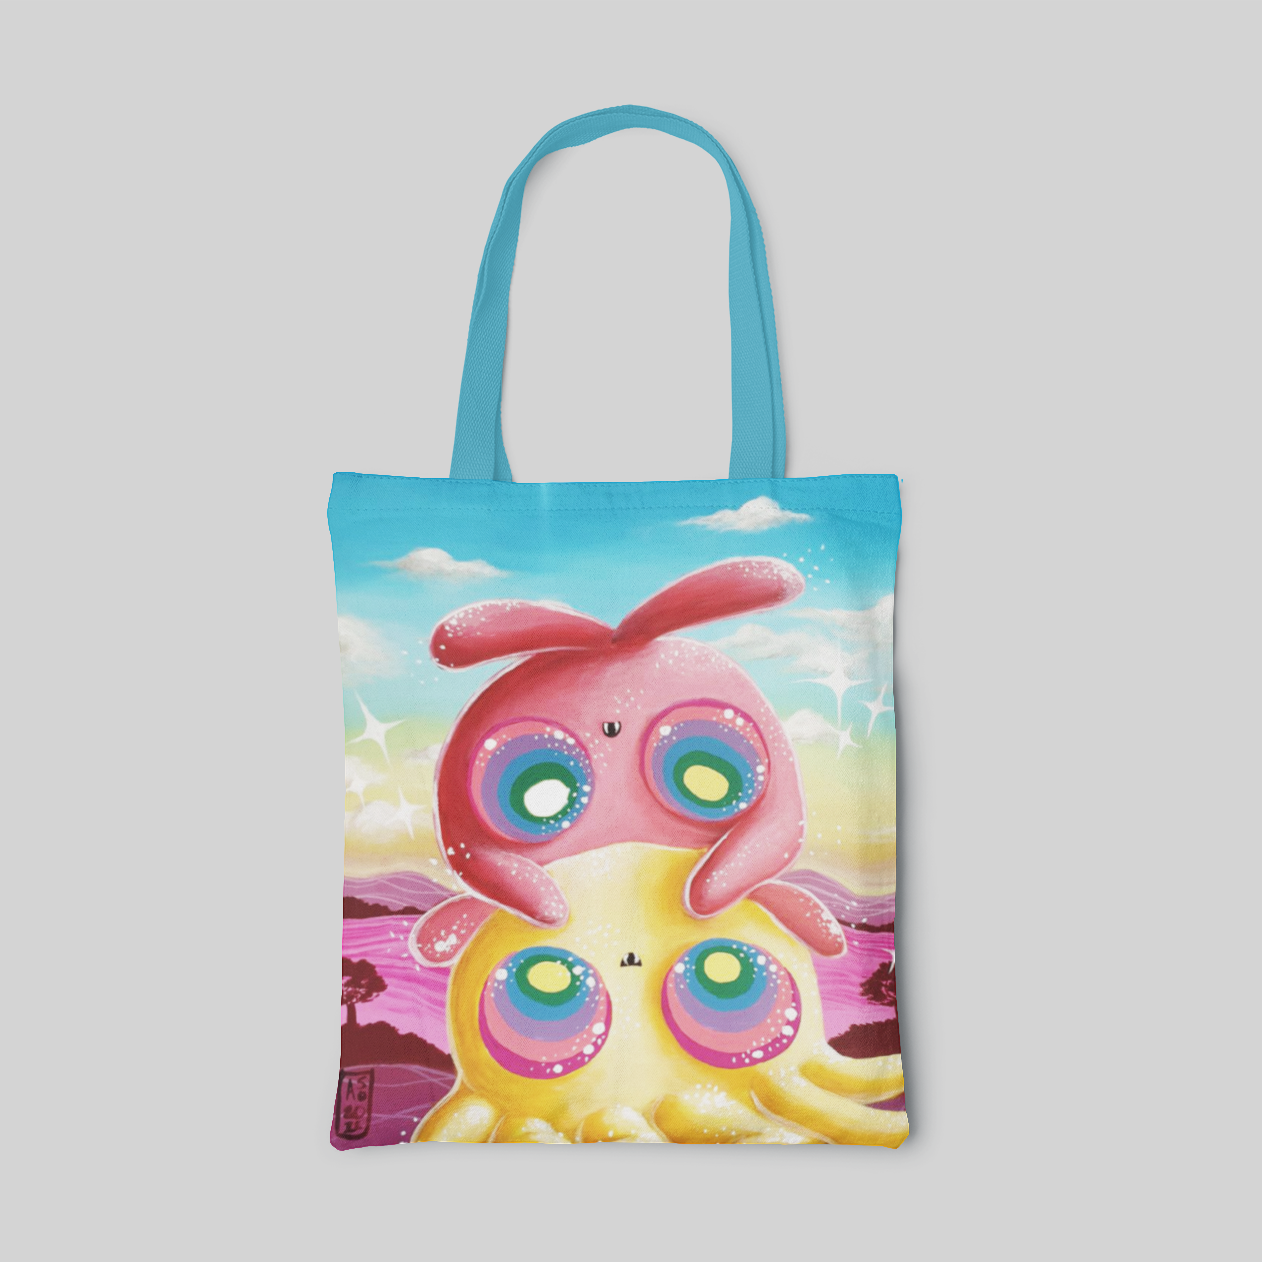 colourful lowbrow designed tote bag with cartoon bunny and octopus on a pink beach with blue skies, front side